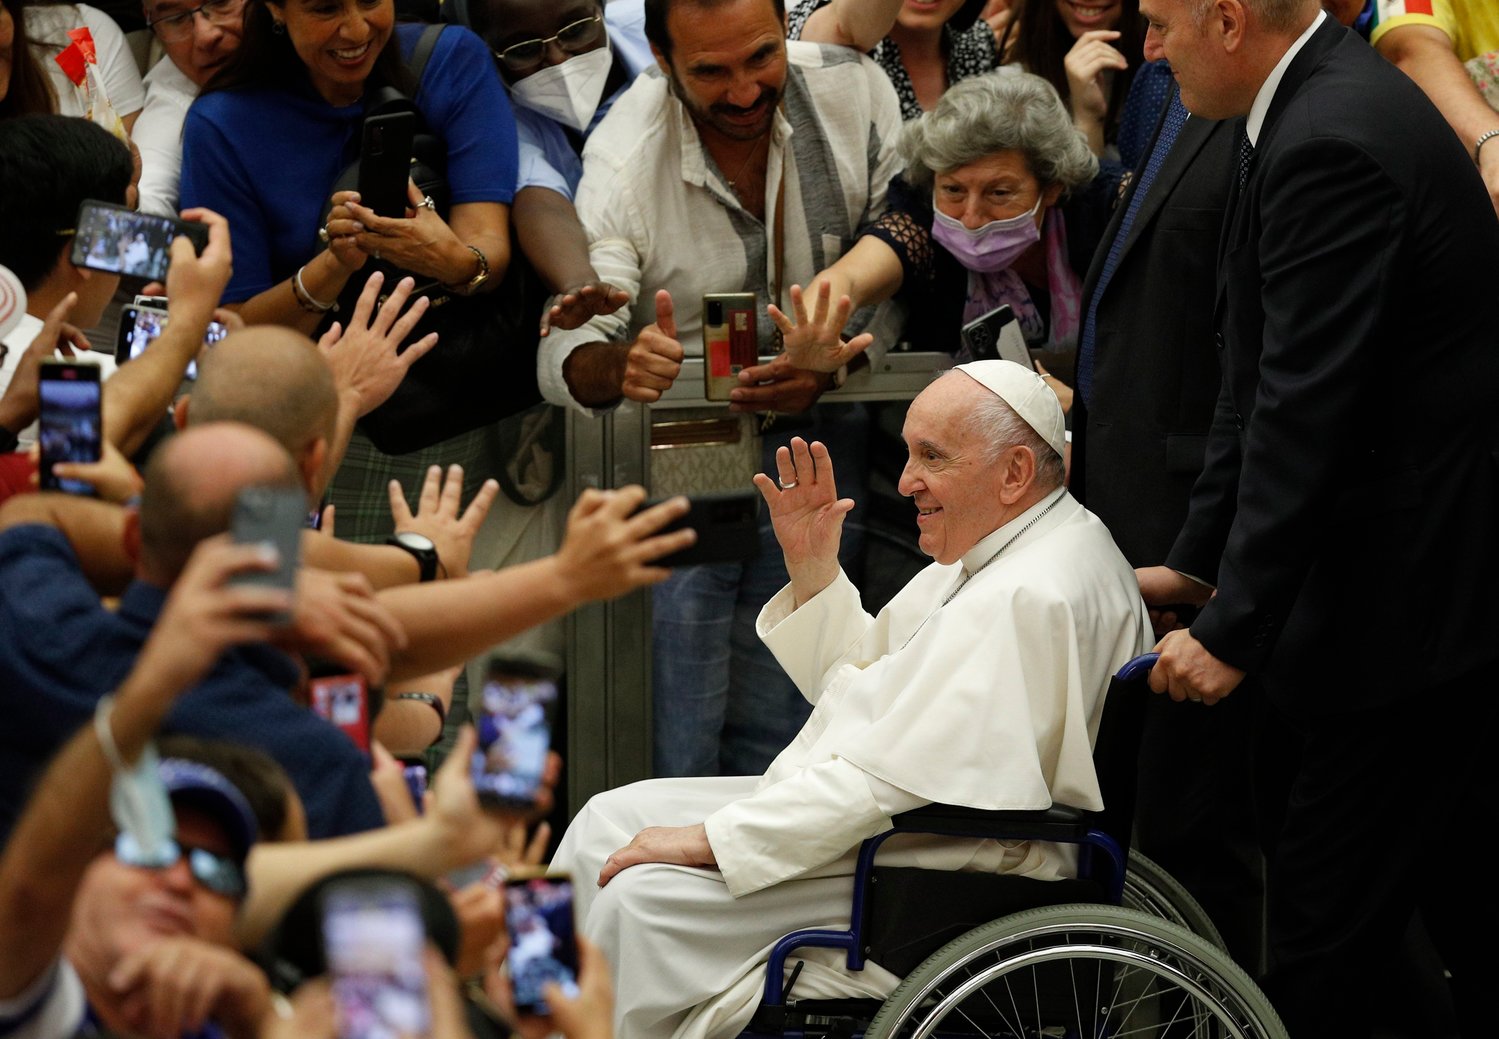 Pope Francis greets the crowd as he leaves his general audience in the Paul VI hall at the Vatican Aug. 3.